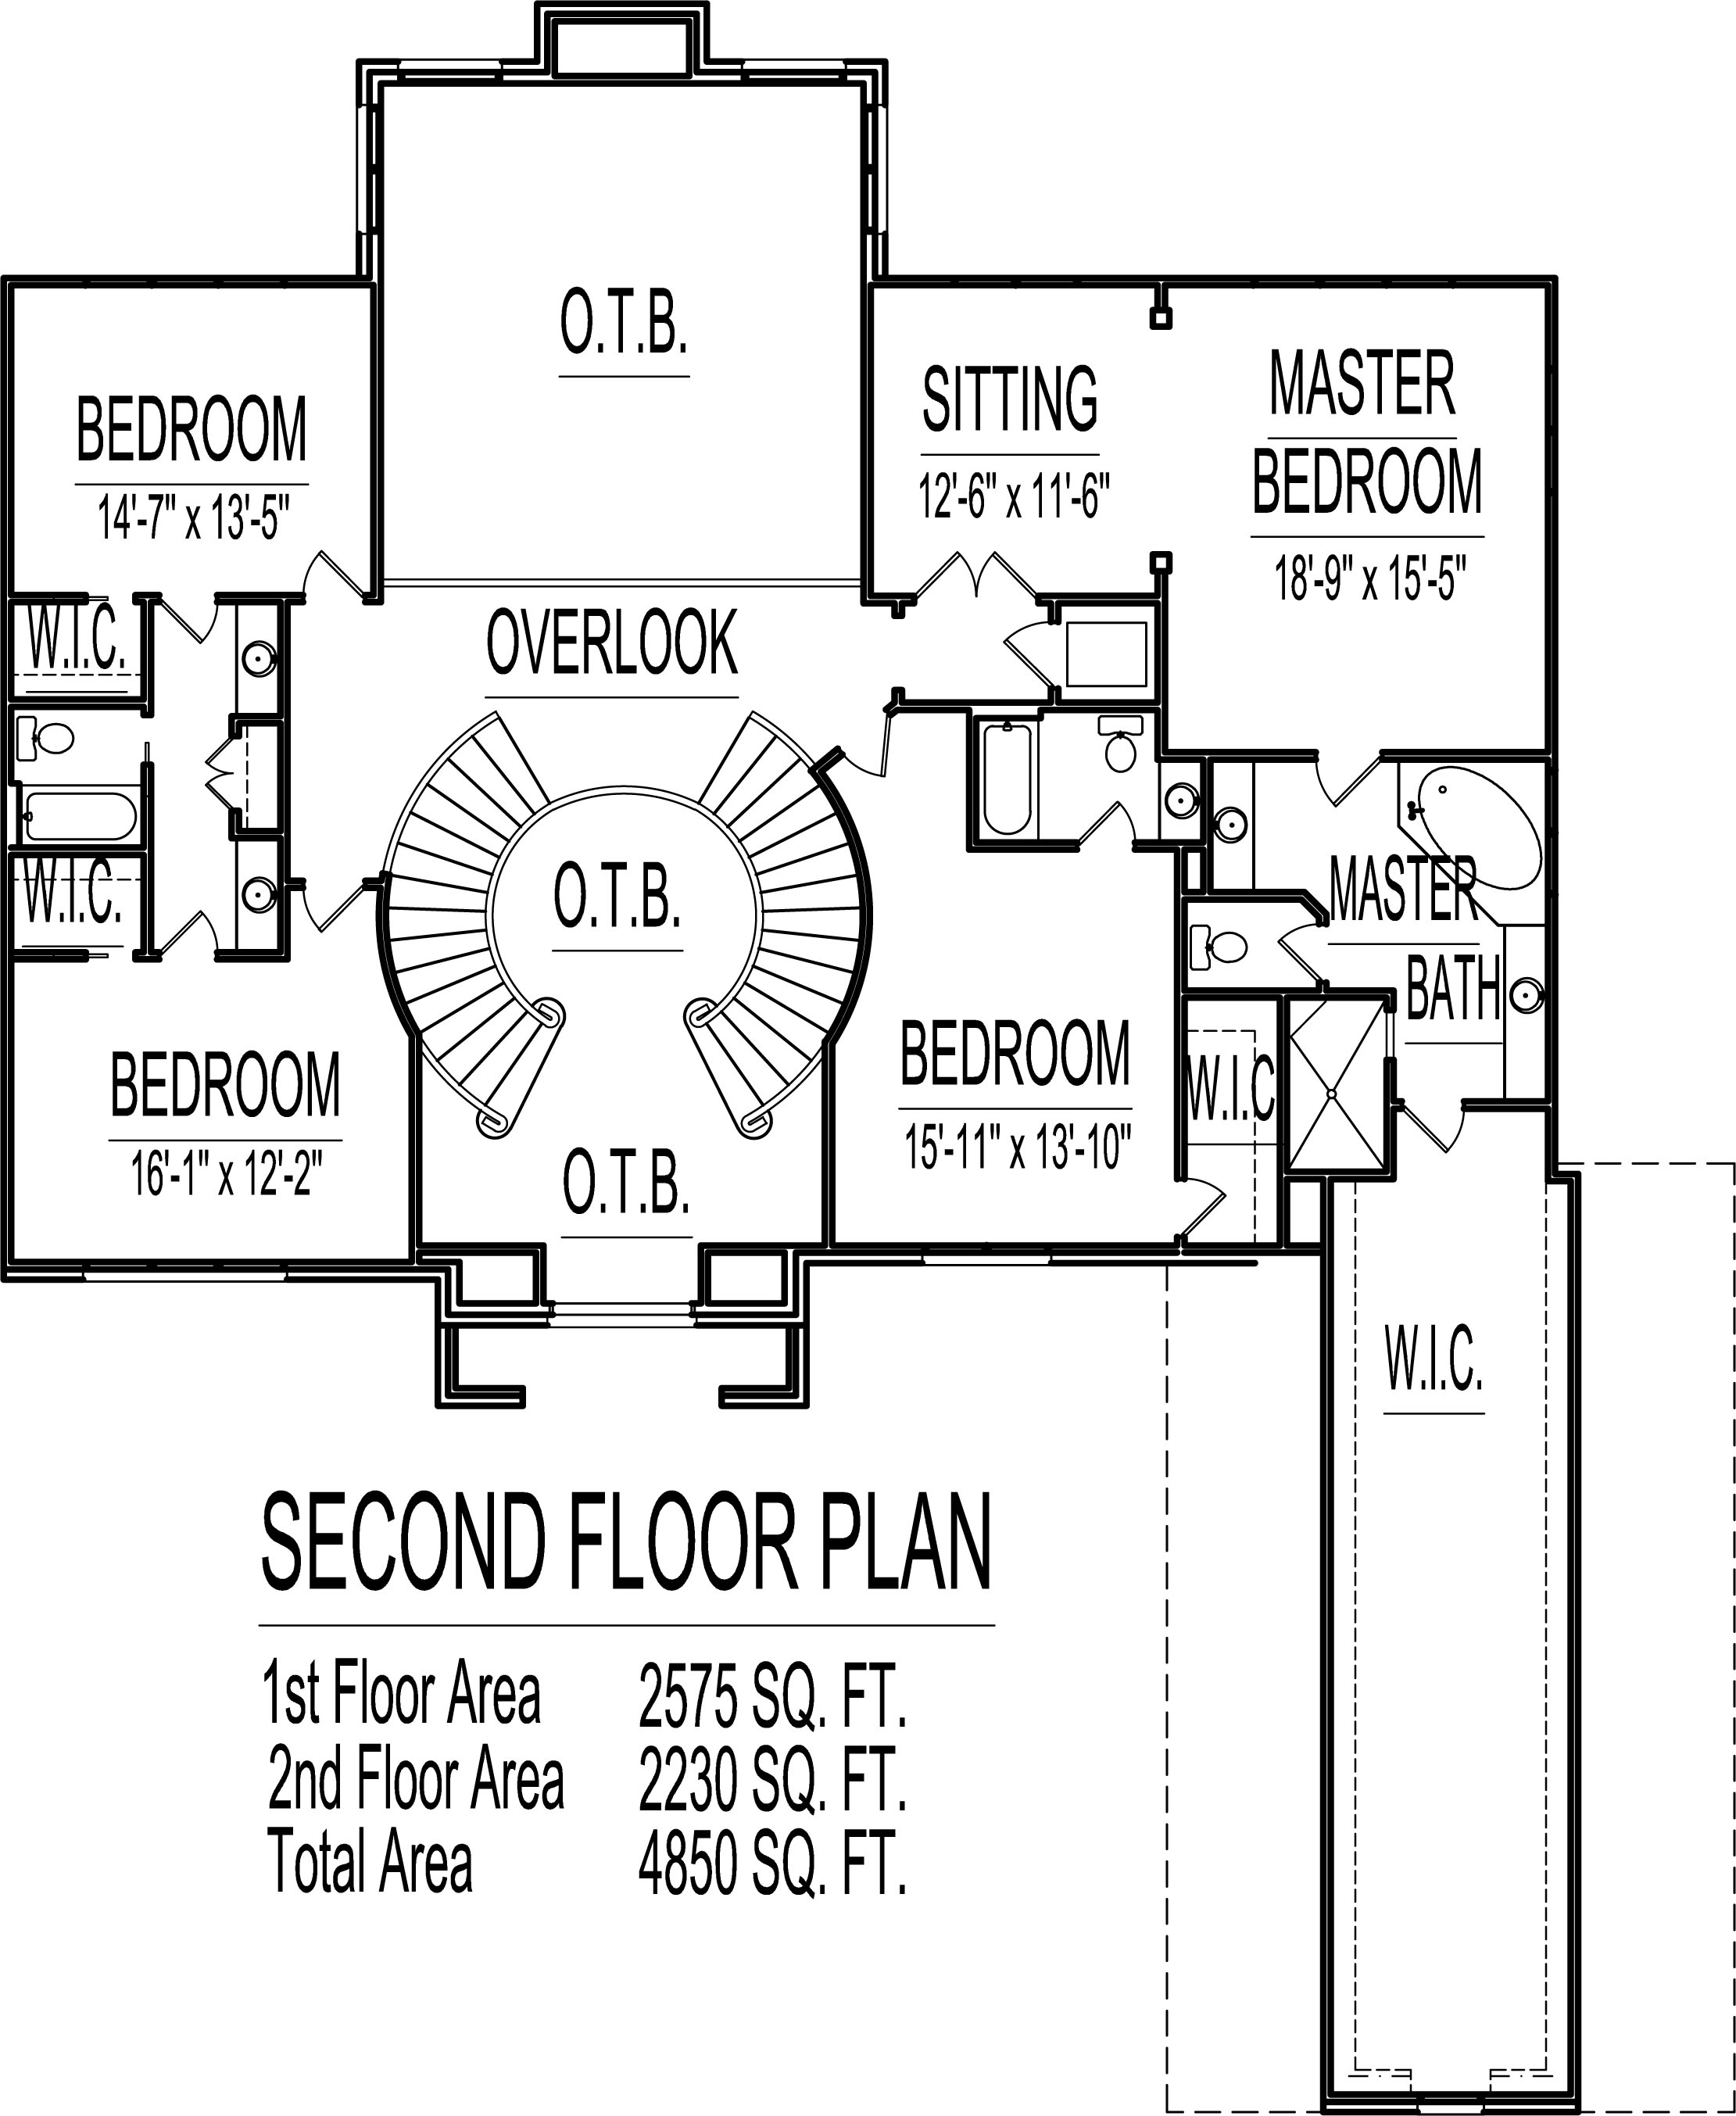 4500 Square Foot House Floor Plans 5 Bedroom 2 Story Double Stairs